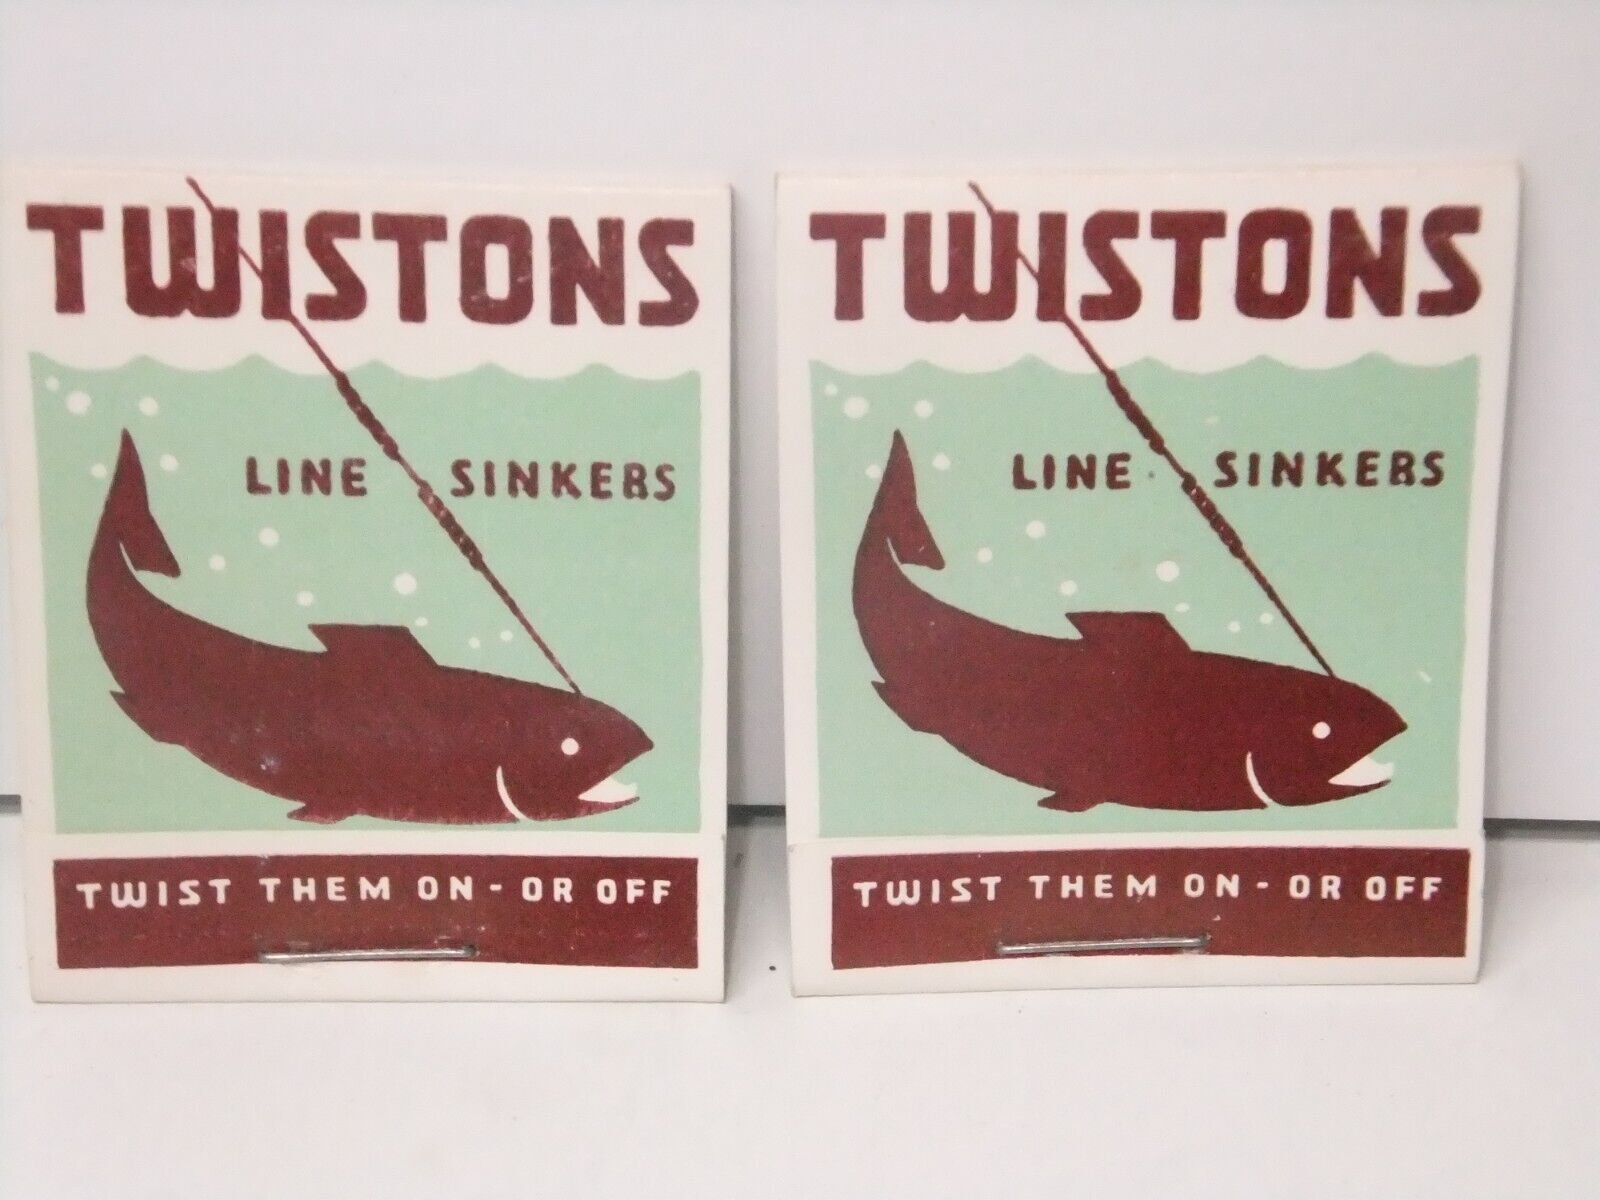 TWISTONS - Fishing Line Sinkers - Stream and River Fishing - Trout, Salmon etc.